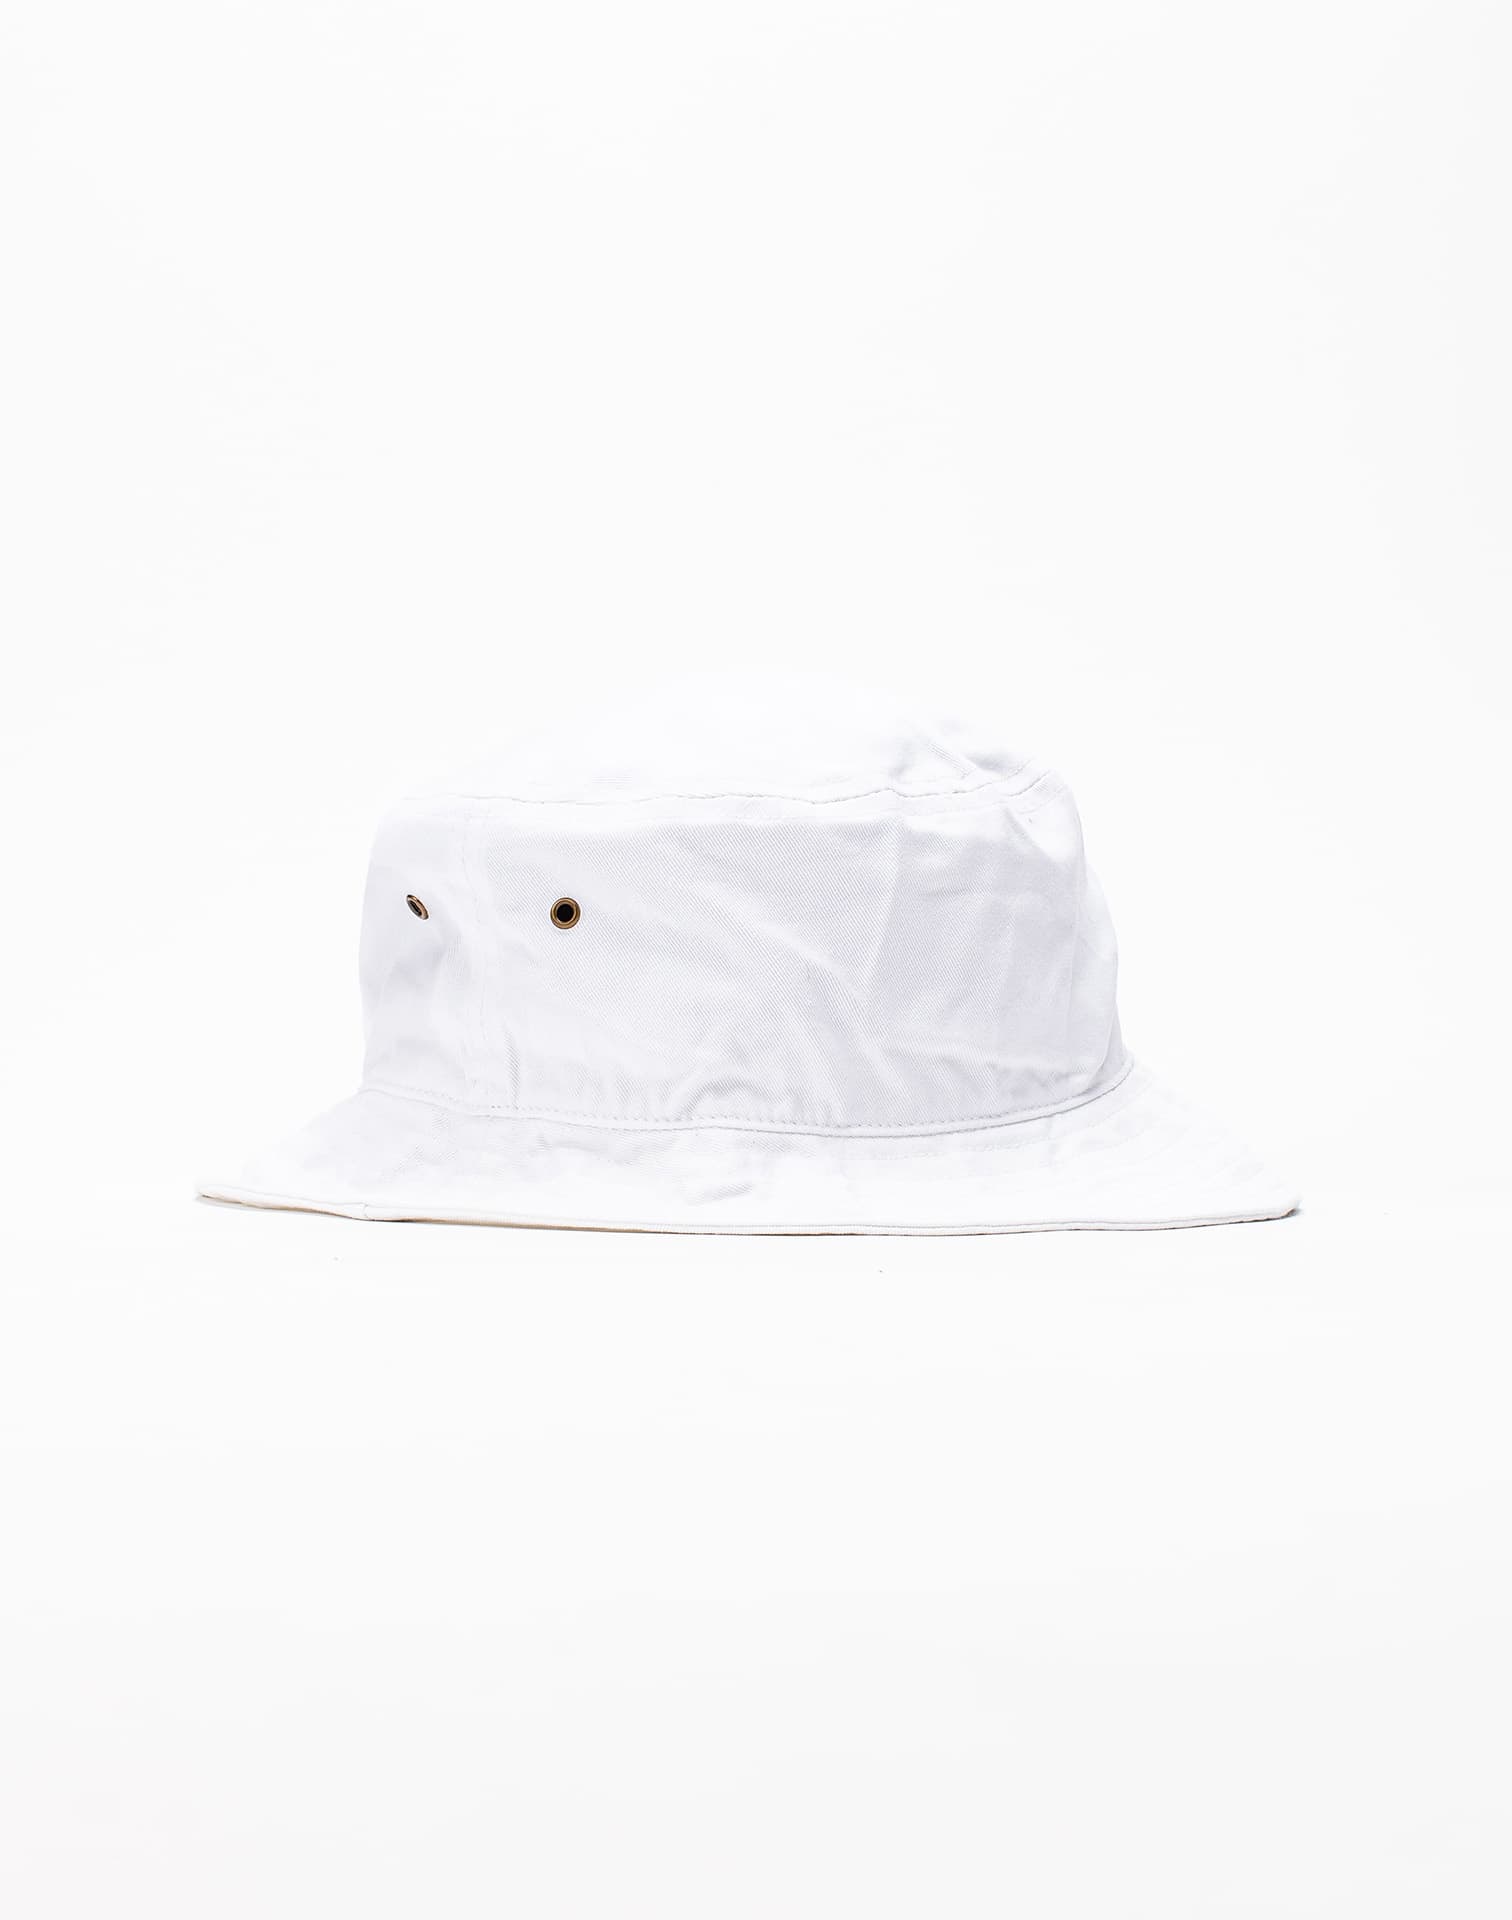 Kim and Bae Men Kim and Bae Solid Bucket Hat White Lg/Xlg